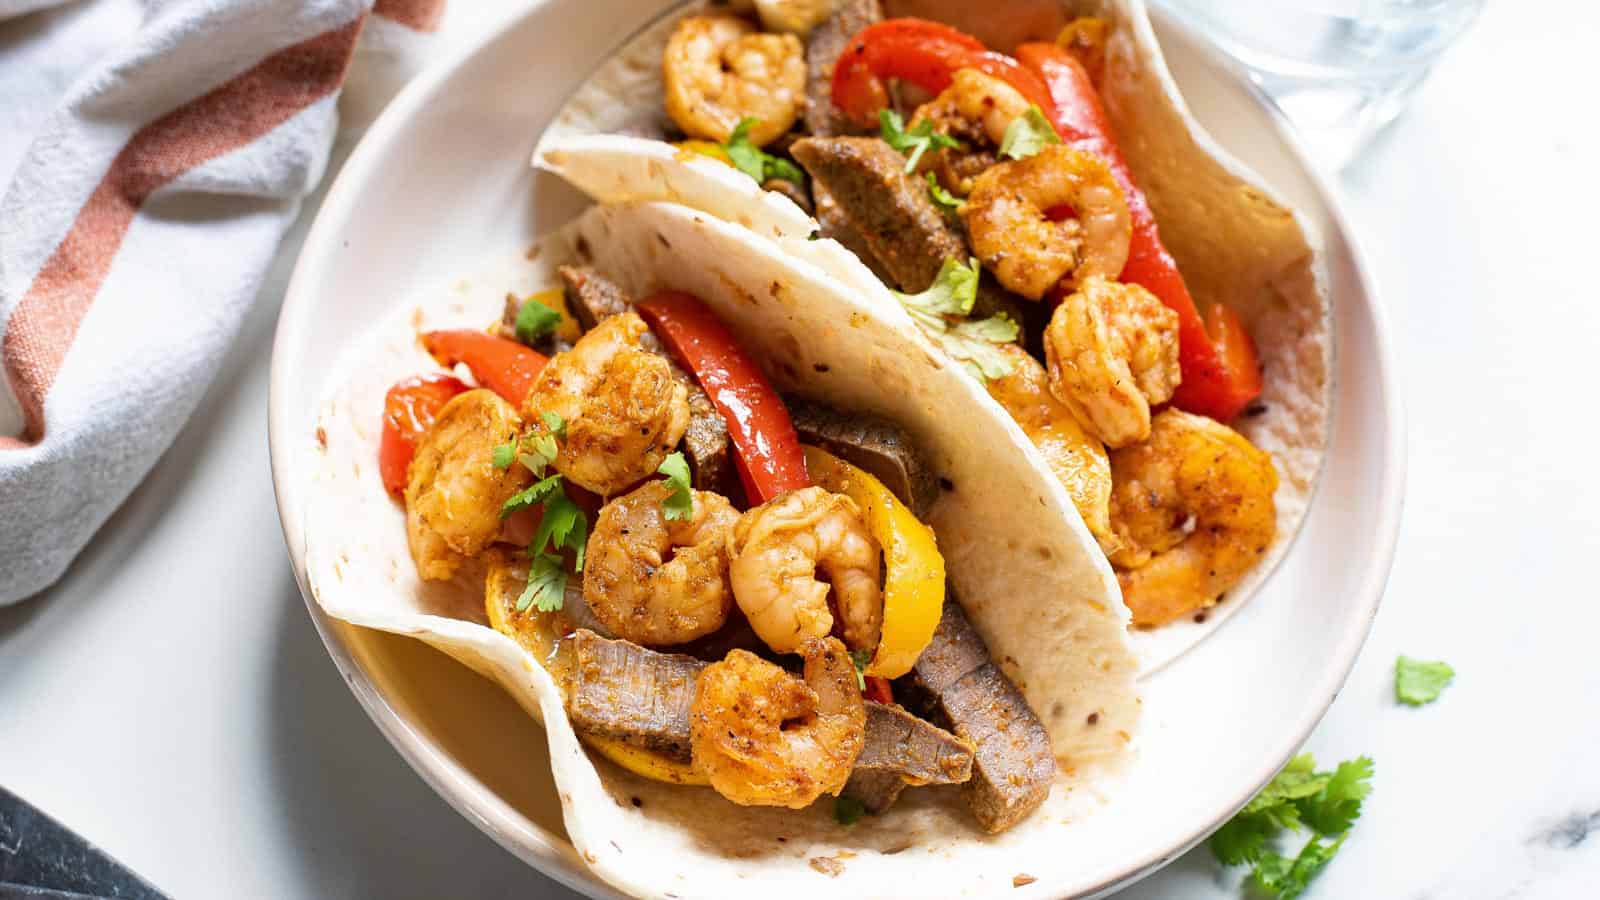 Shrimp and steak fajitas with peppers and onions.